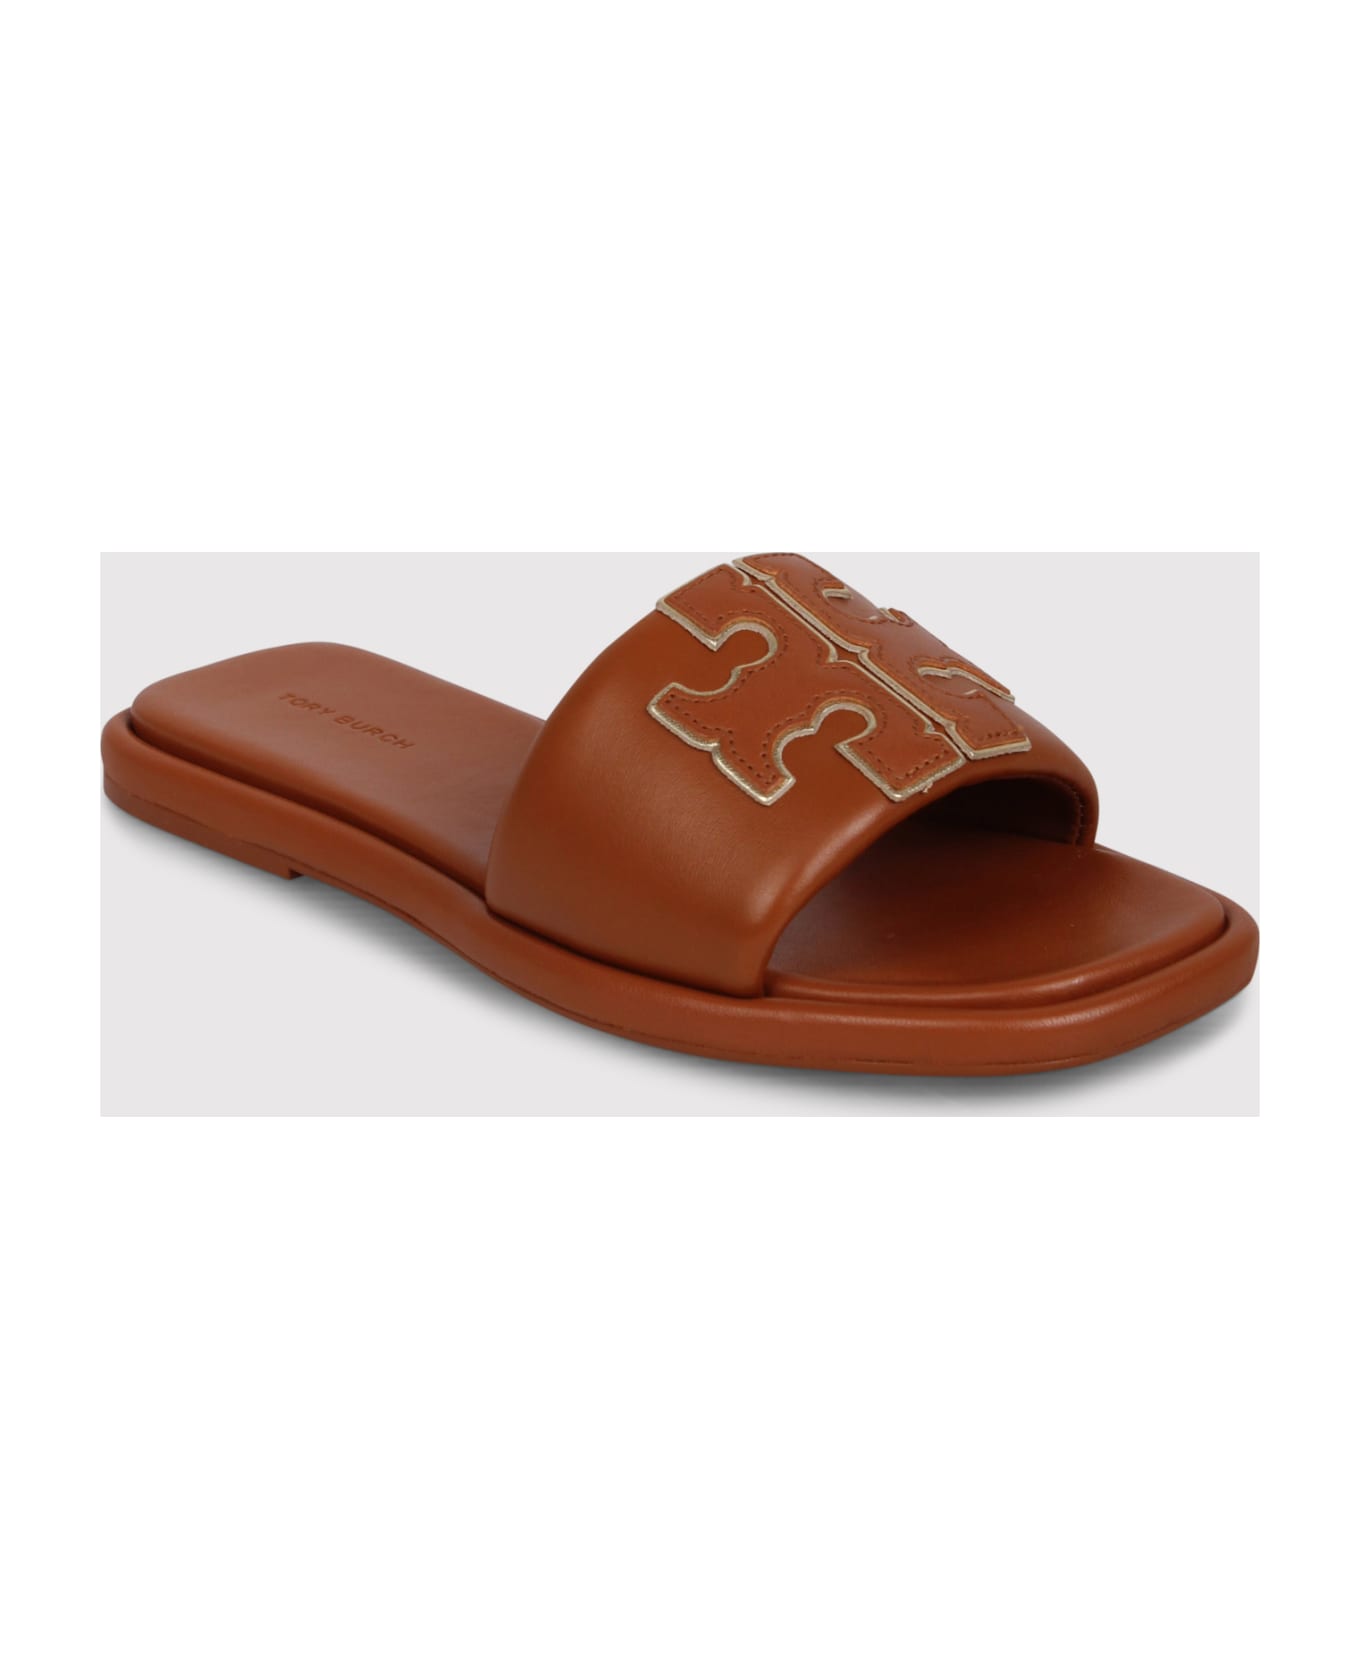 Tory Burch Double T Sport Patch Slides